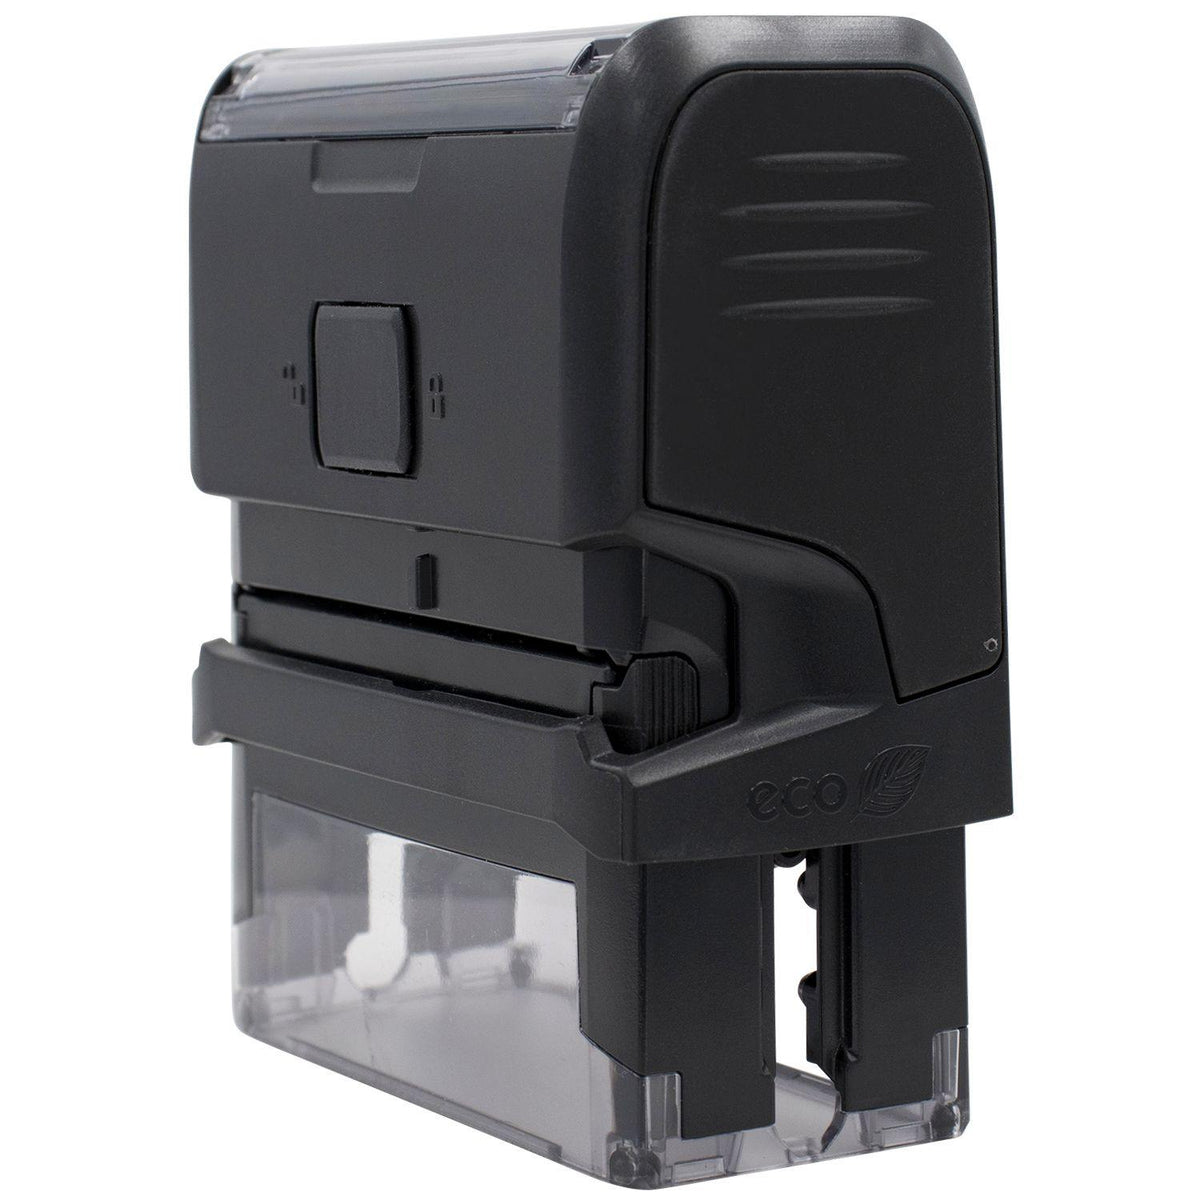 Self Inking COD Stamp - Engineer Seal Stamps - Brand_Trodat, Impression Size_Small, Stamp Type_Self-Inking Stamp, Type of Use_Business, Type of Use_Finance, Type of Use_Office